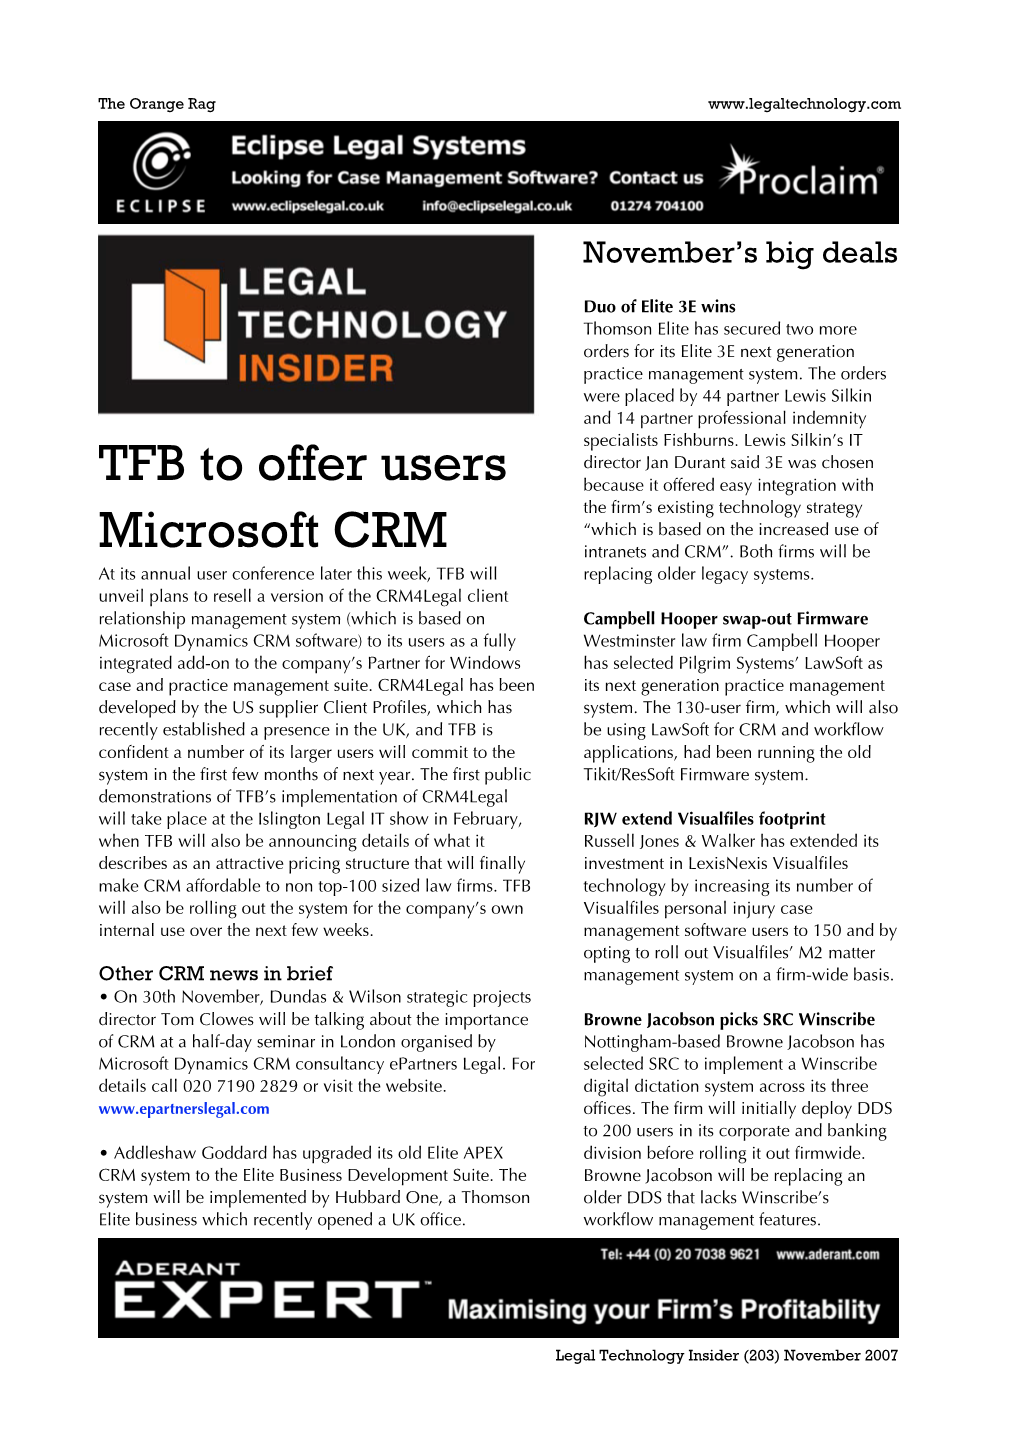 TFB to Offer Users Microsoft